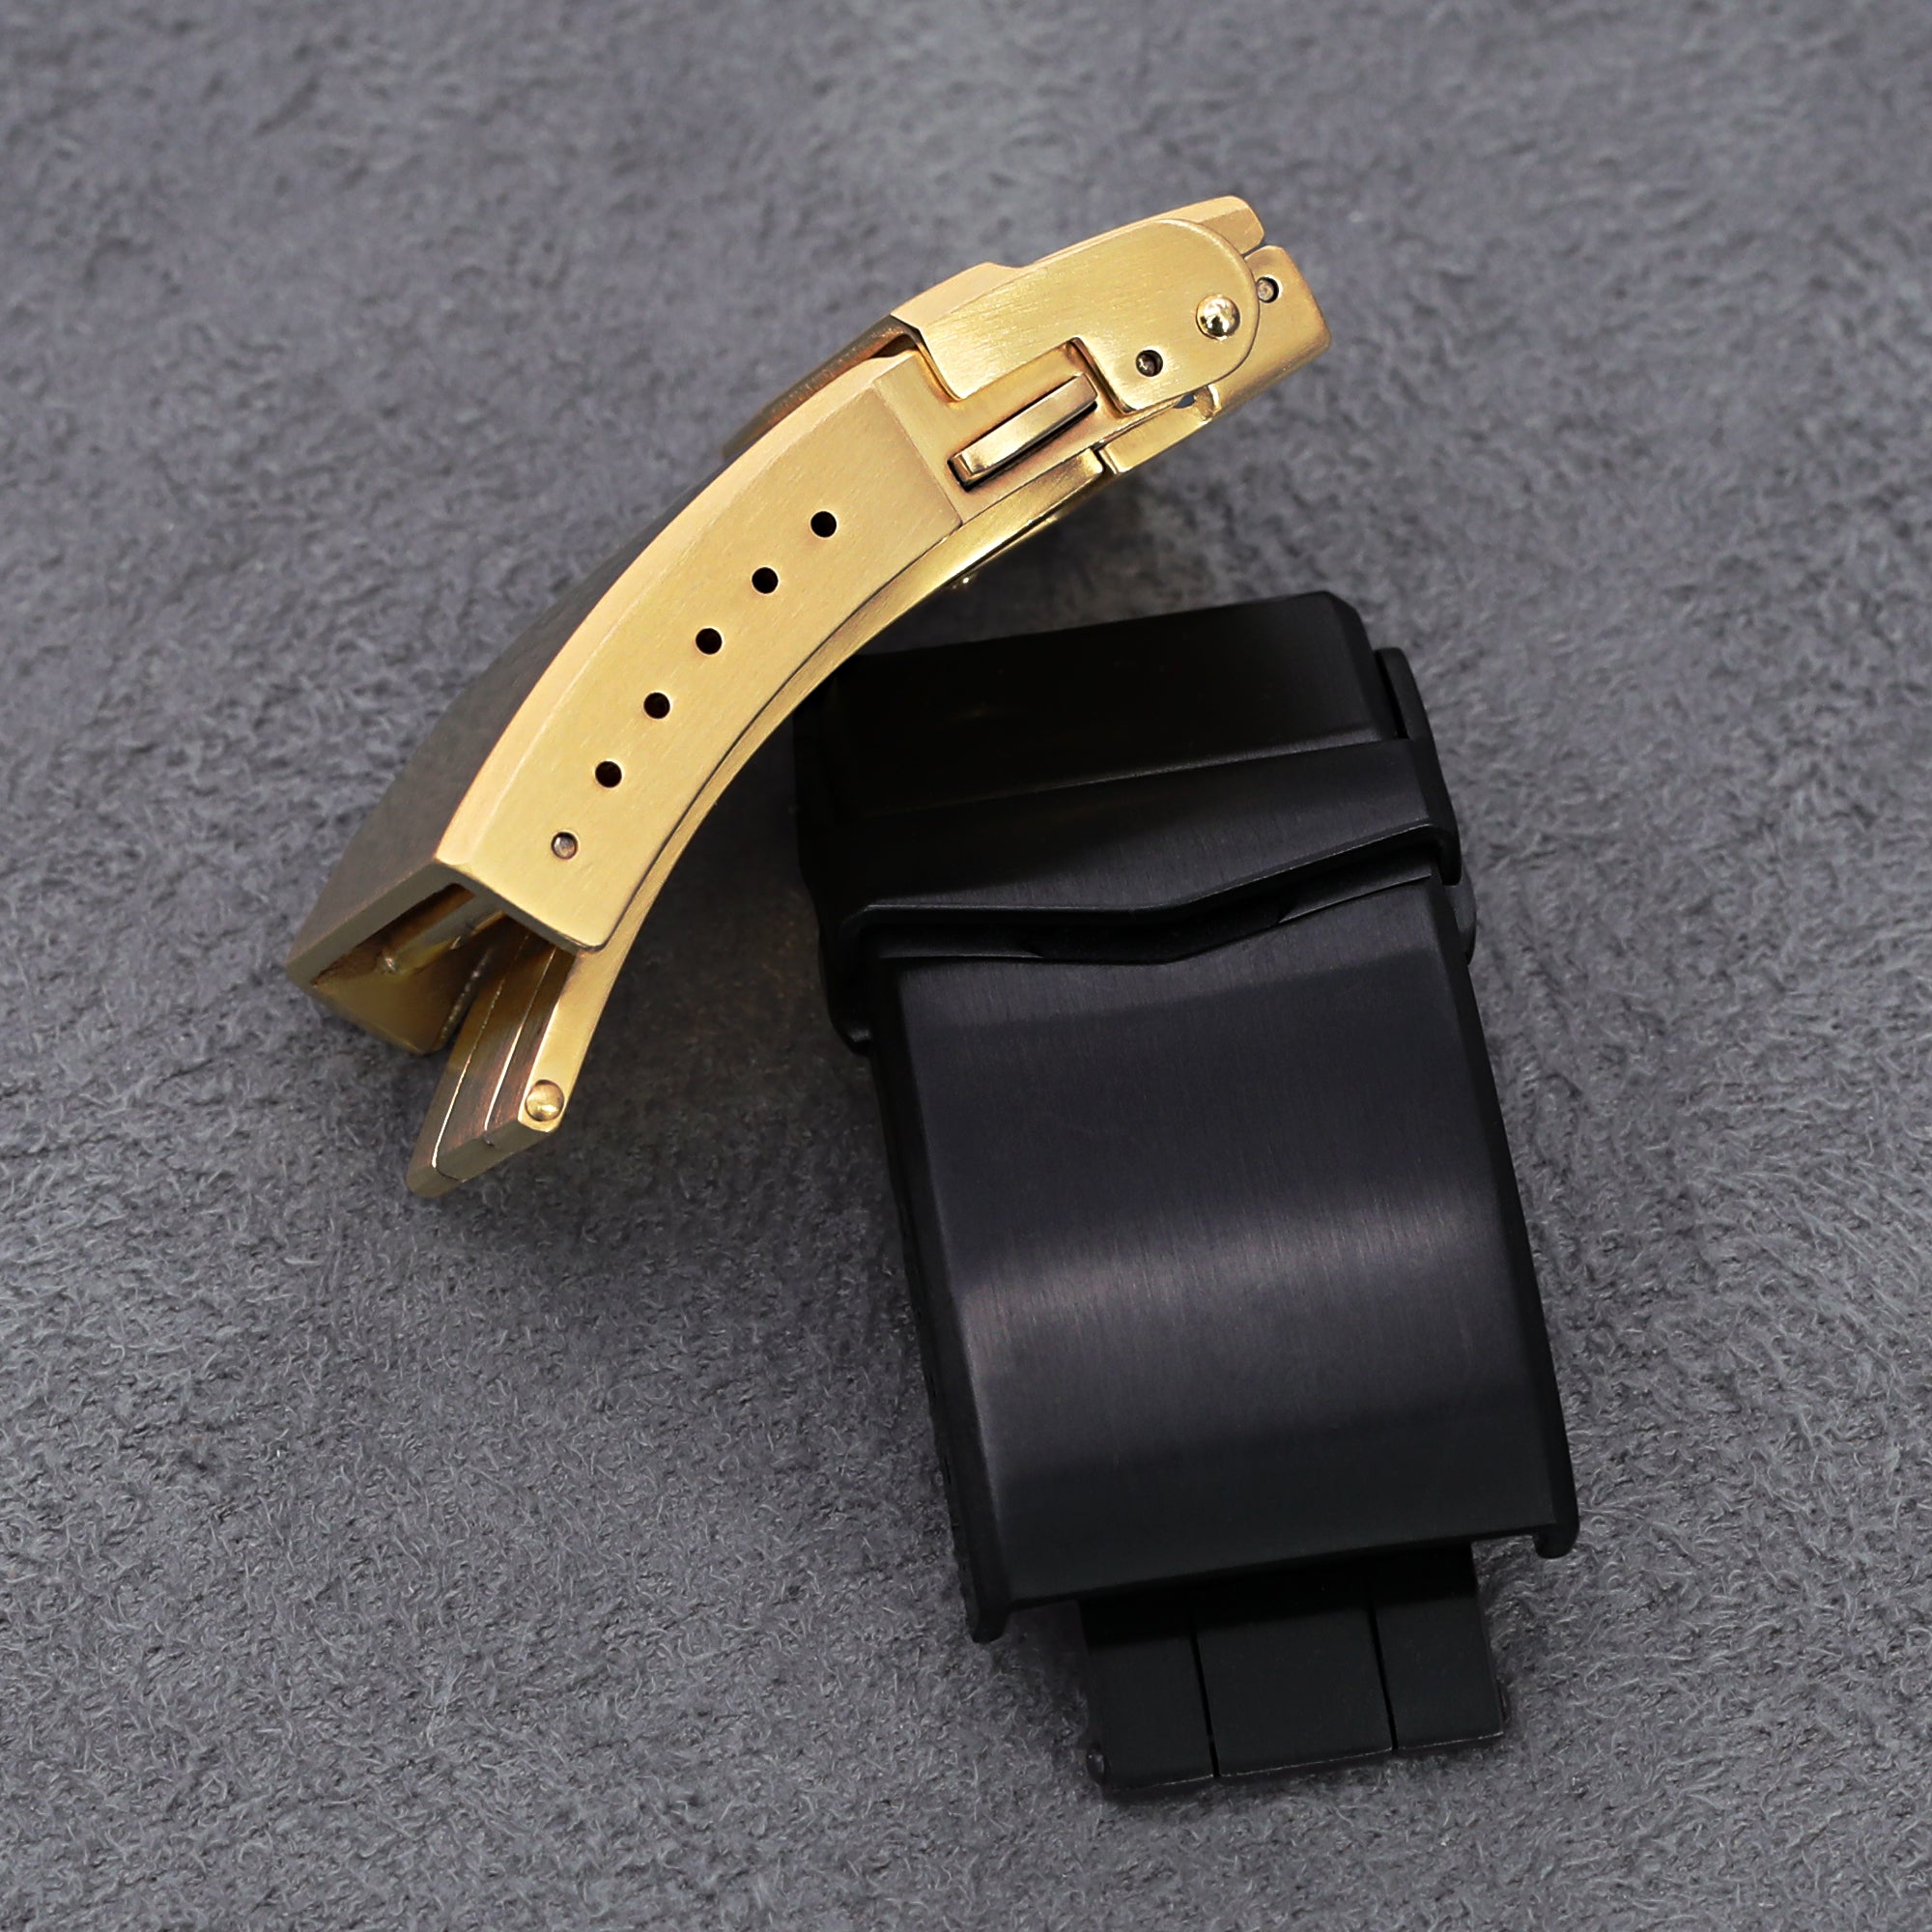 Watch Bands | Watch Bands Are Necessary Part Of Any Watch